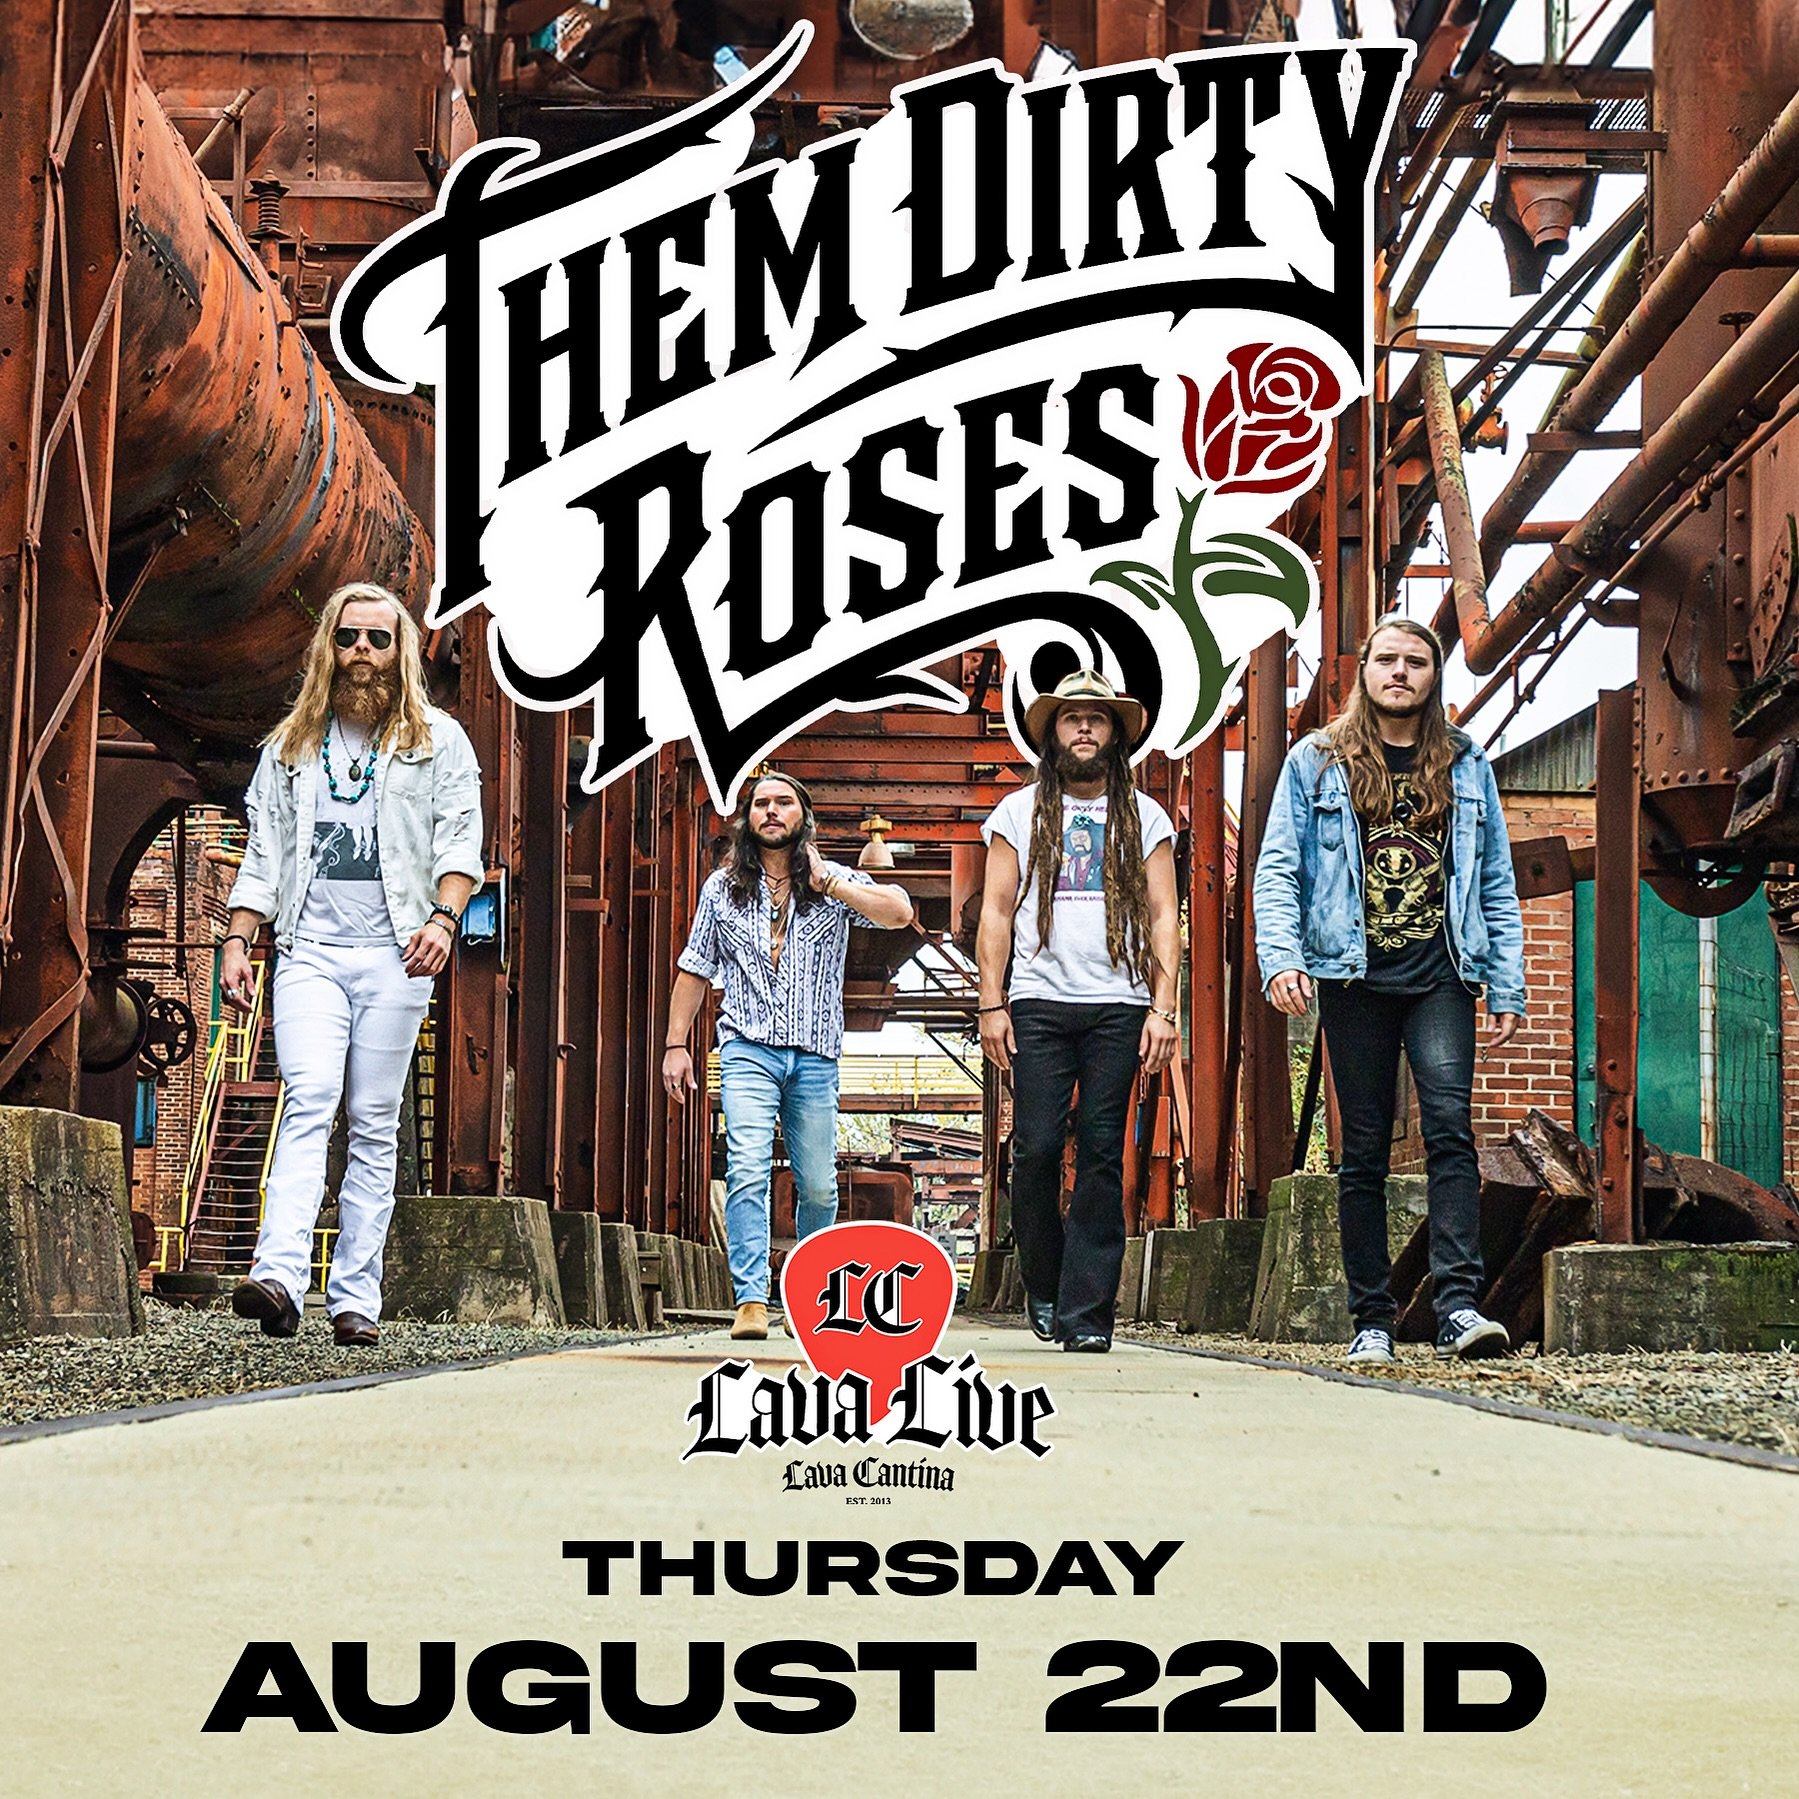 🚨 JUST ANNOUNCED! Them Dirty Roses @lavacantinatc August 22nd!!! 🚨

***PRE-SALE FOR ALL LAVA CANTINA PLATINUM AND BLACK CARD MEMBERS BEGINS WED 5/15 AT 10 AM***

***TIX ON SALE FRIDAY 5/17 AT 10 AM***
_________

🔥 We are very excited to announce t